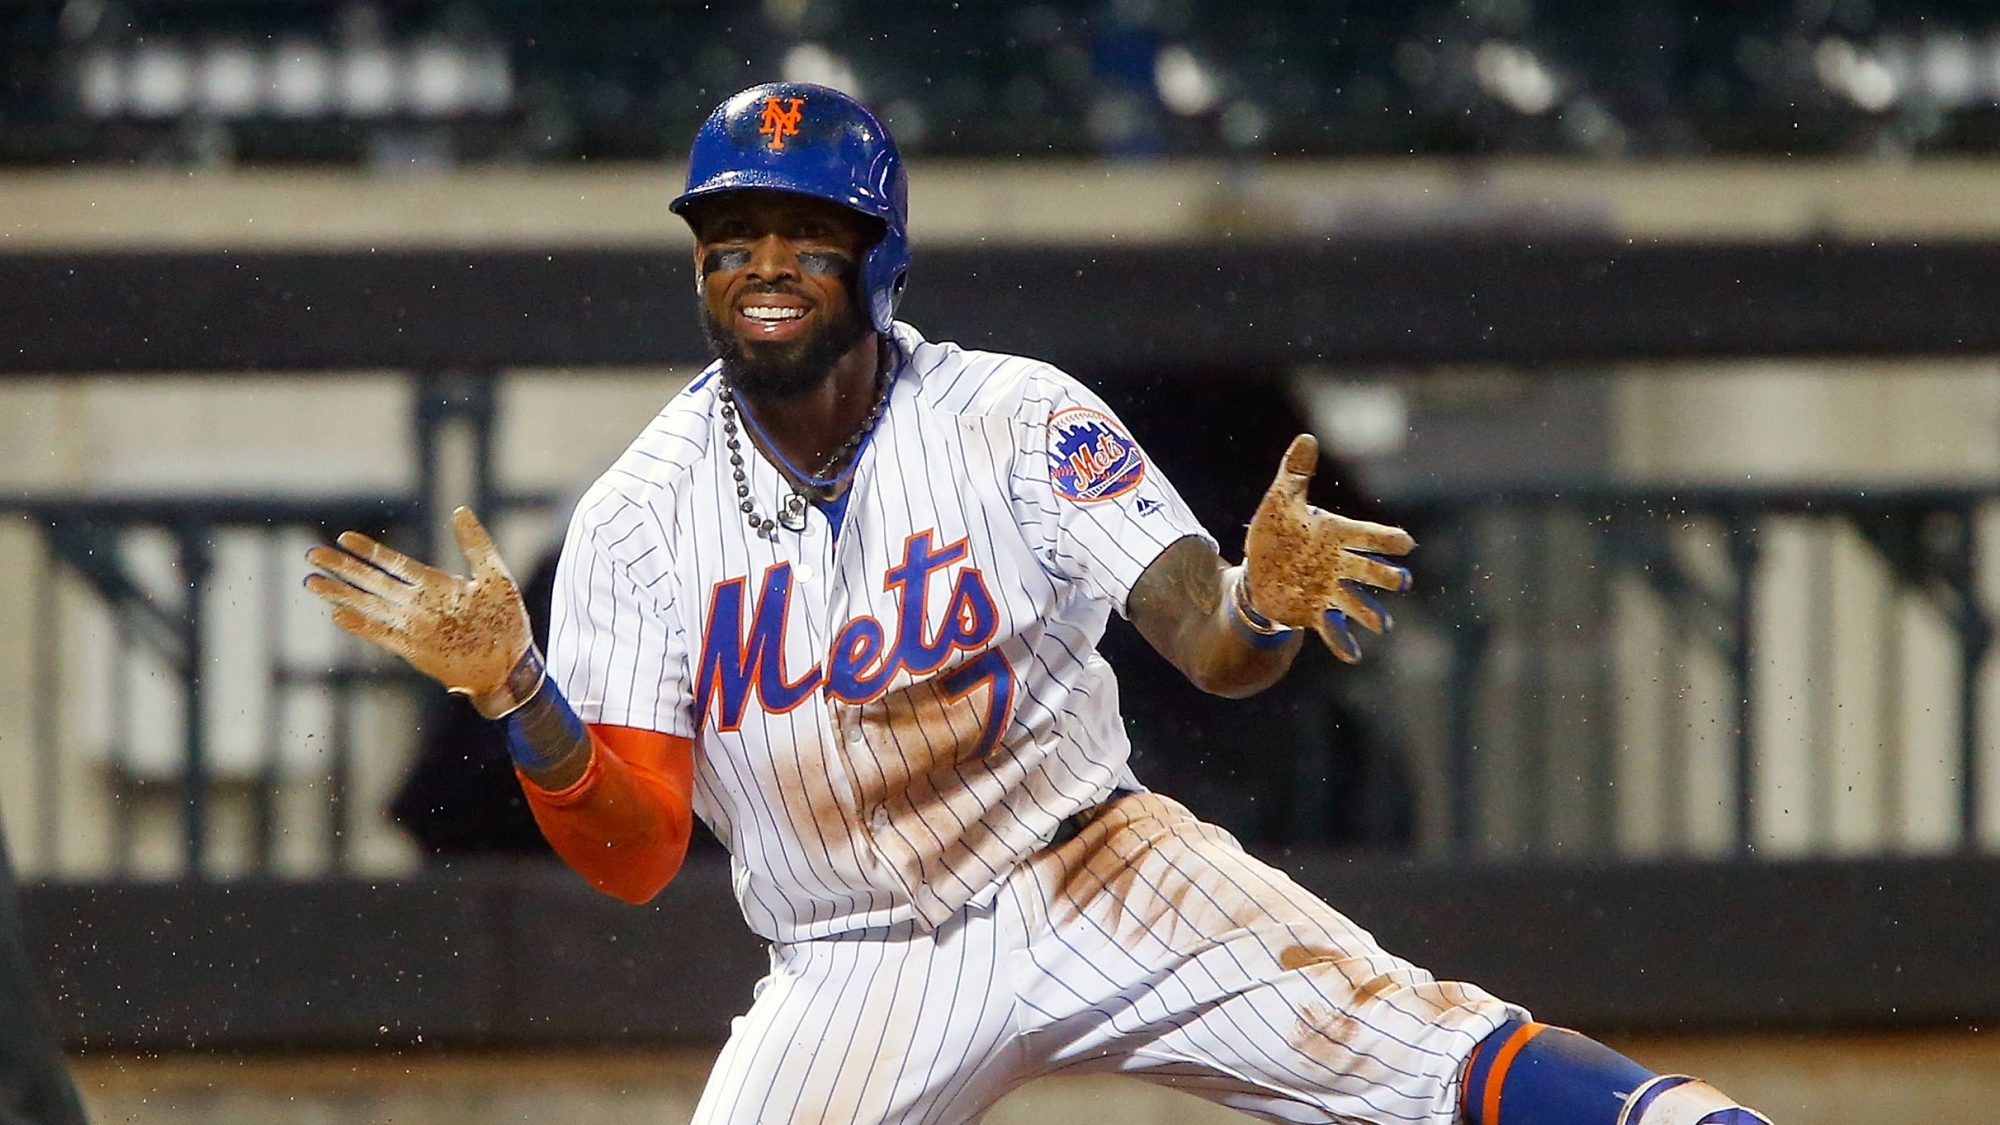 New York Mets: Missing the Days of Prime Jose Reyes is All Too Real